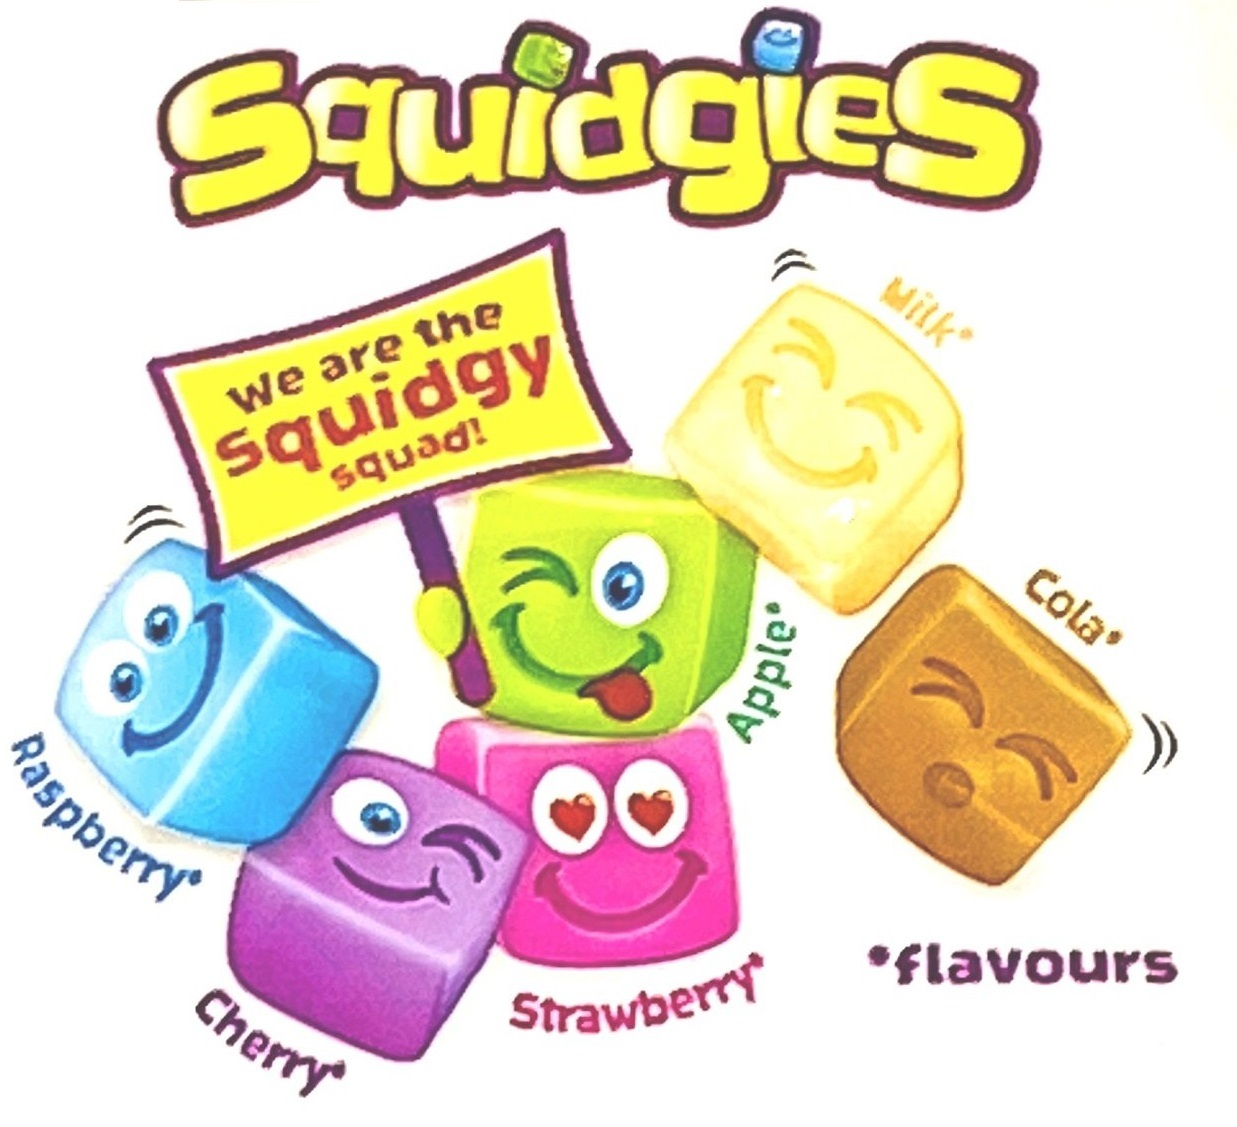 We are the Squidgy squad!